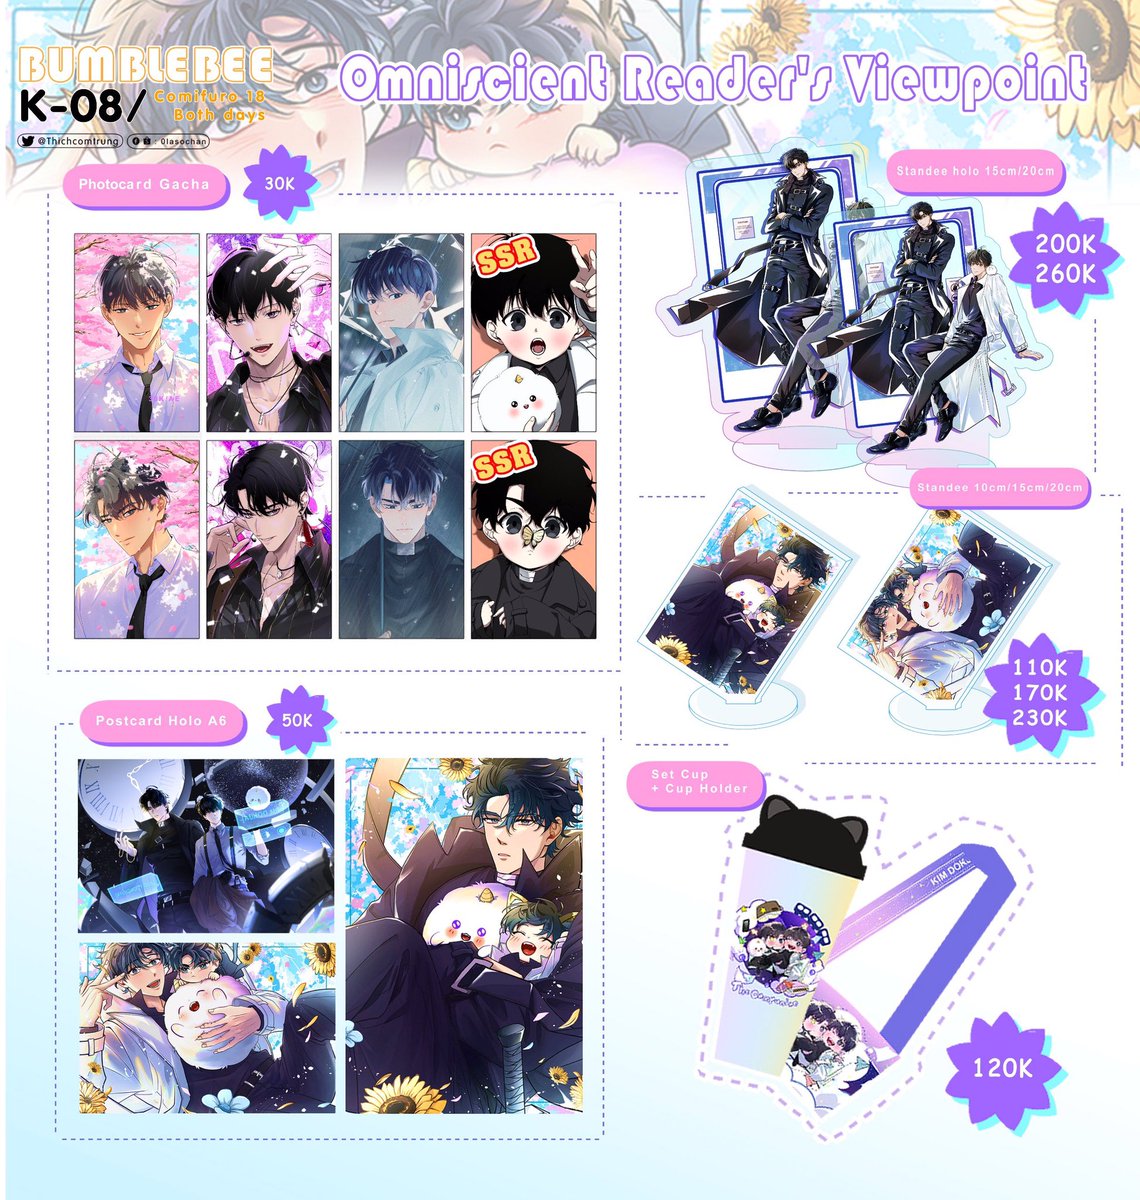 Here is the catalogue of ORV for comifuro18 😘

[RTs & likes very appreciated❤️💖] 

#cf18 
#cf18catalogue #ComicFrontier18 
#衆獨 #全知讀者視角 #ORV #김독자 #전지적독자시점 #Joongdok